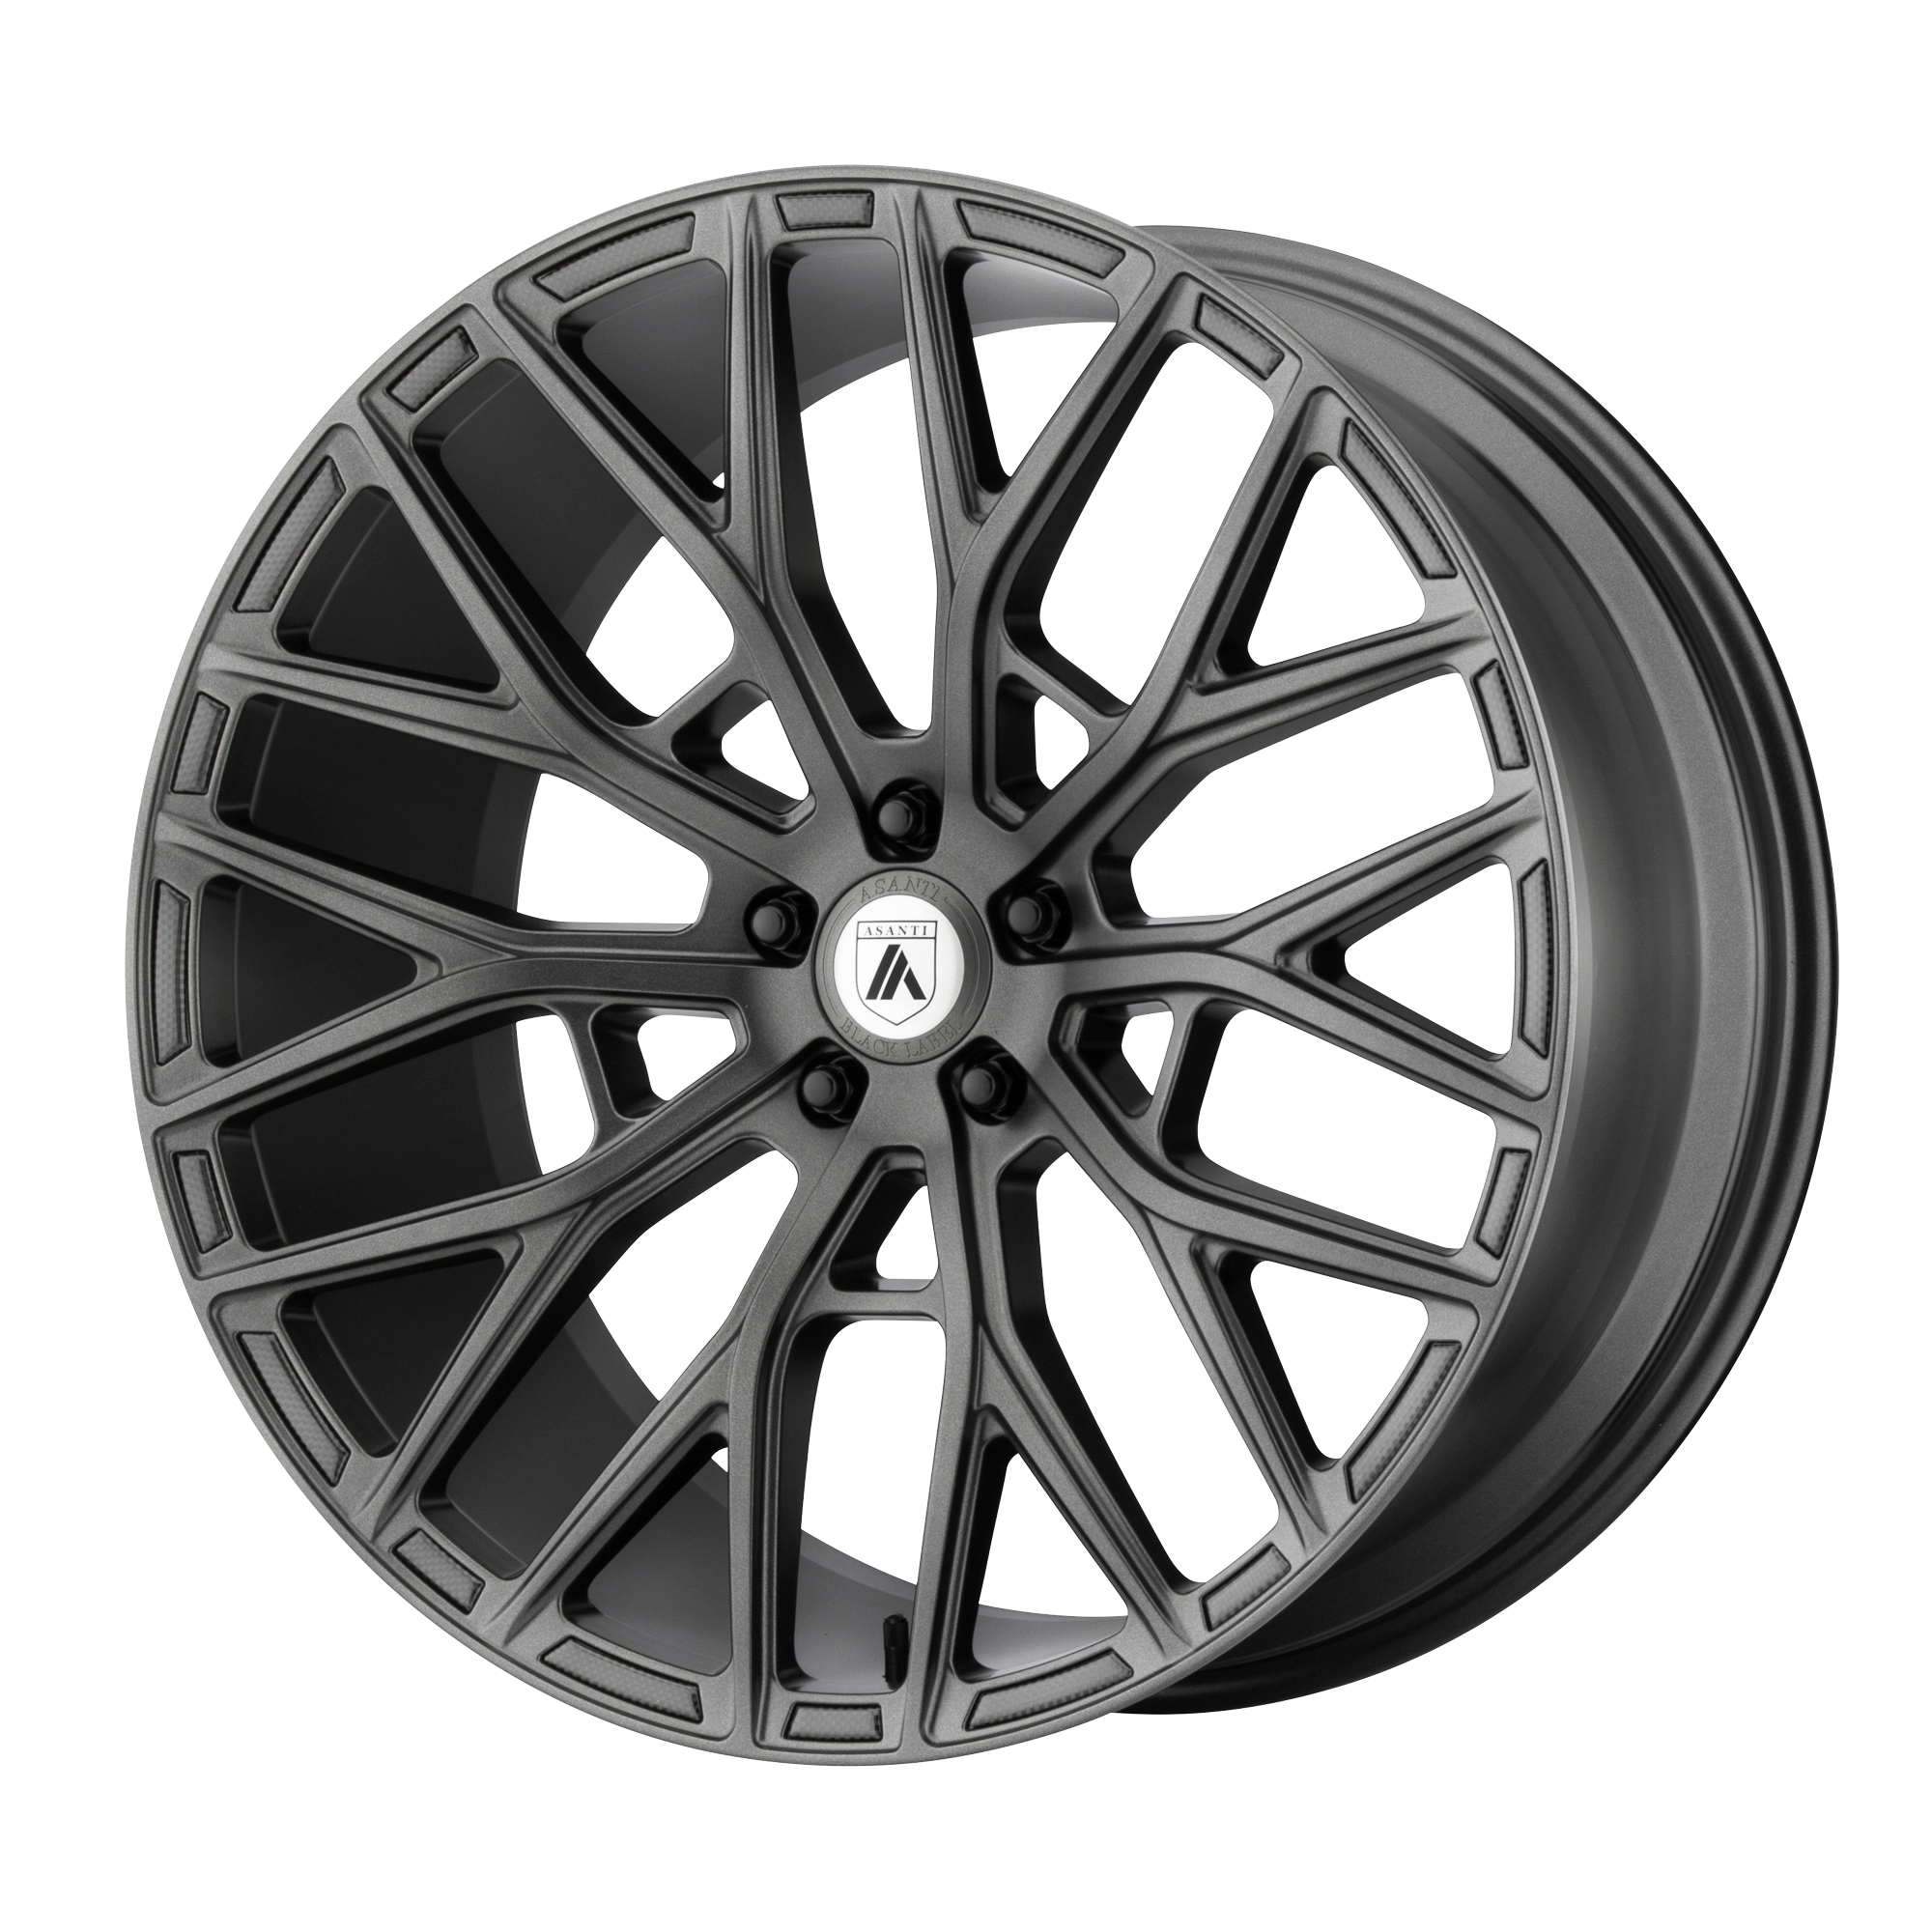 LEO 20x10.5 5x120.00 MATTE GRAPHITE (38 mm) - Tires and Engine Performance